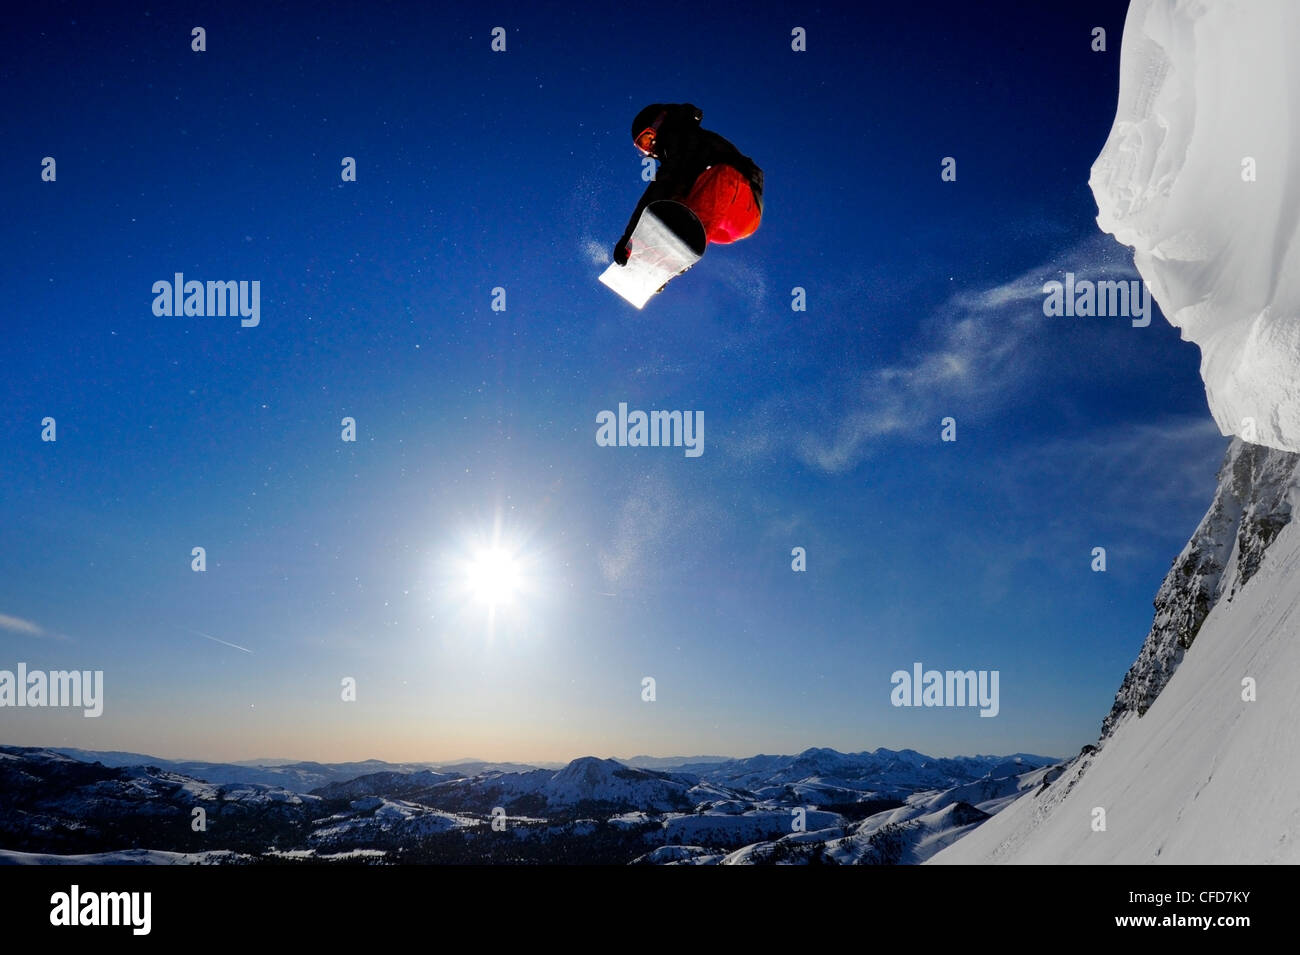 A snowboarder soaring in the air at sunrise in the Sierra Nevada mountains near Lake Tahoe, California. Stock Photo